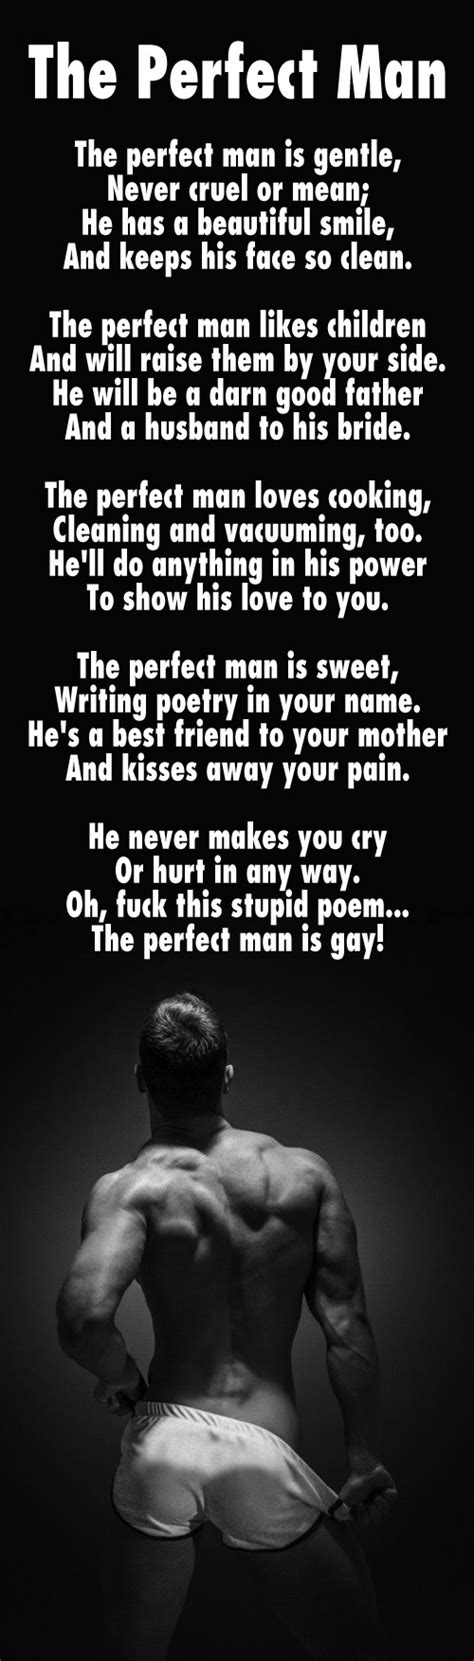 The Perfect Man Poem Men Quotes Funny Gay Quotes Funny Quotes